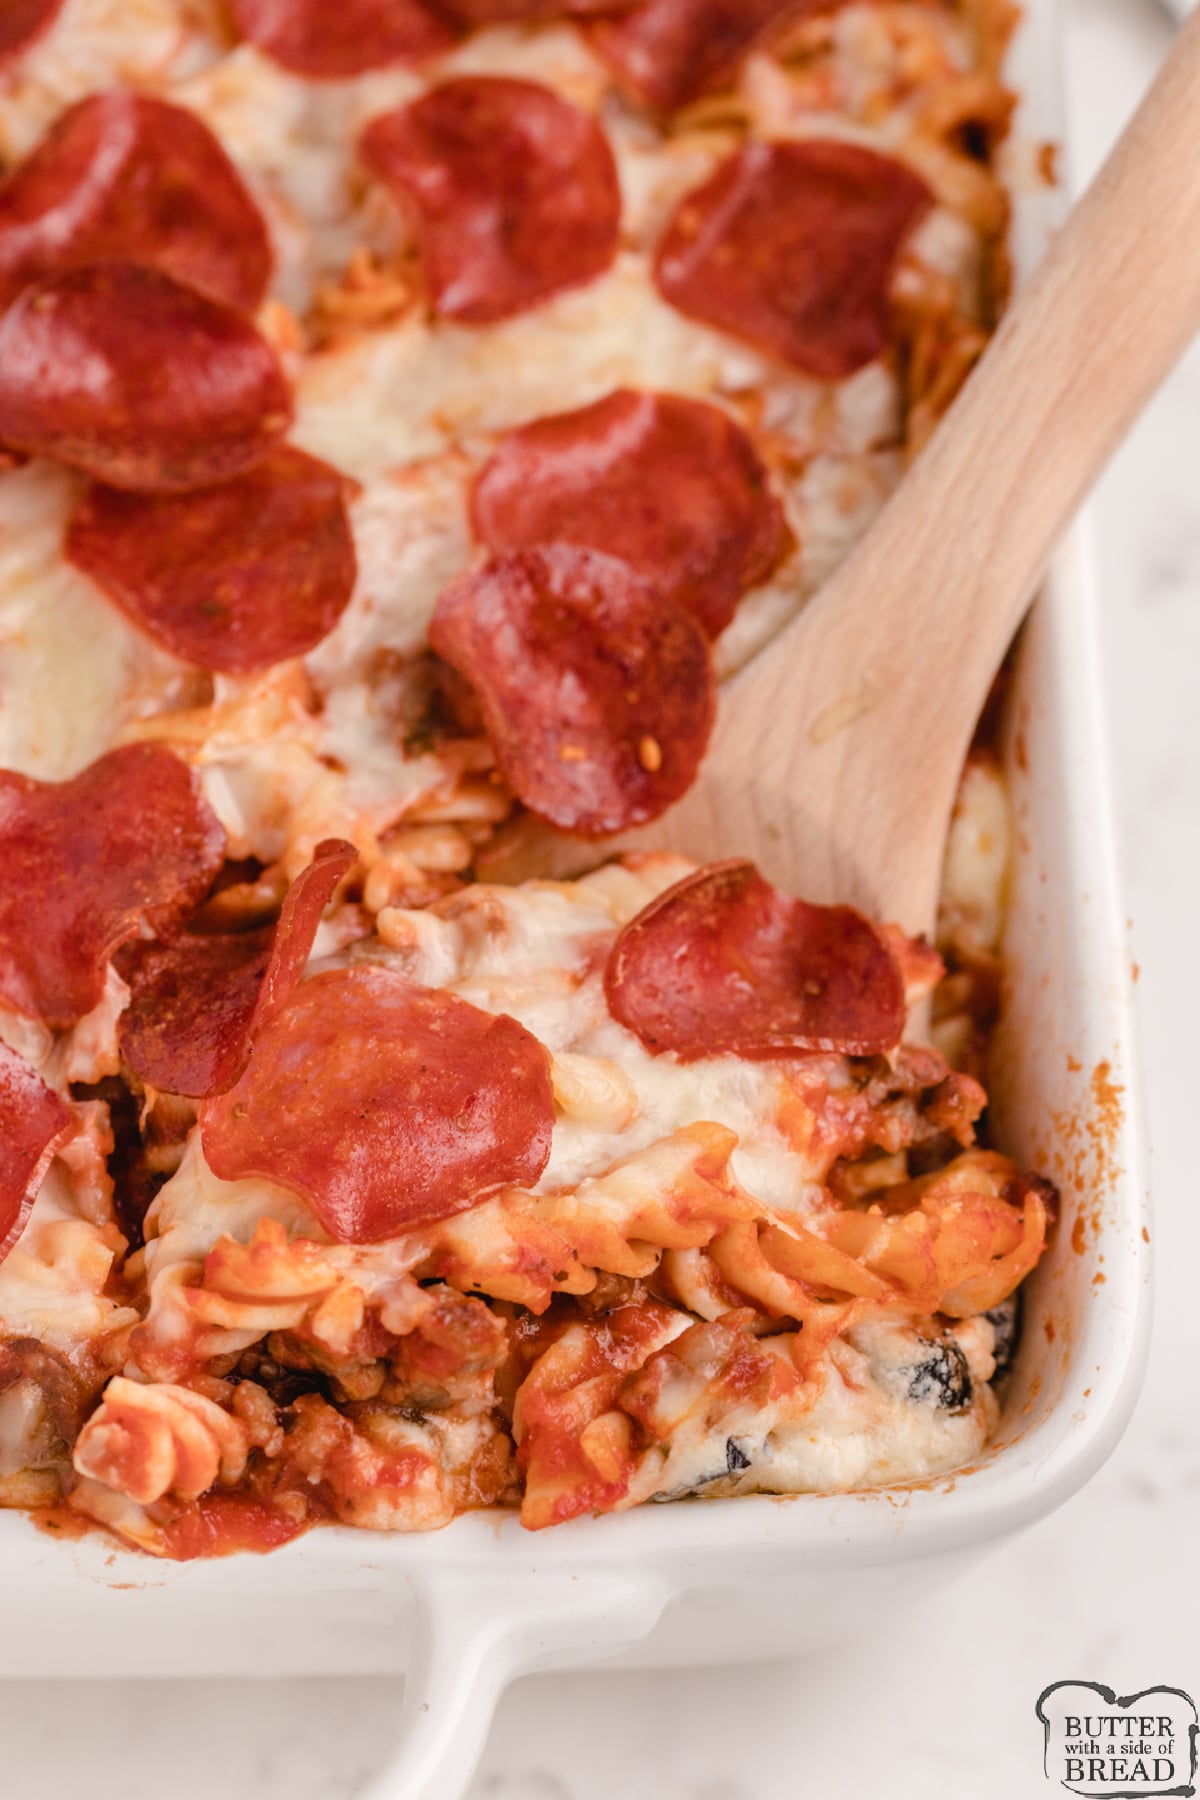 Pizza Pasta Casserole is a dinner recipe that the whole family will love! Simple baked casserole recipe made with rotini, Italian sausage, pepperoni, spaghetti sauce, veggies and cheese. 